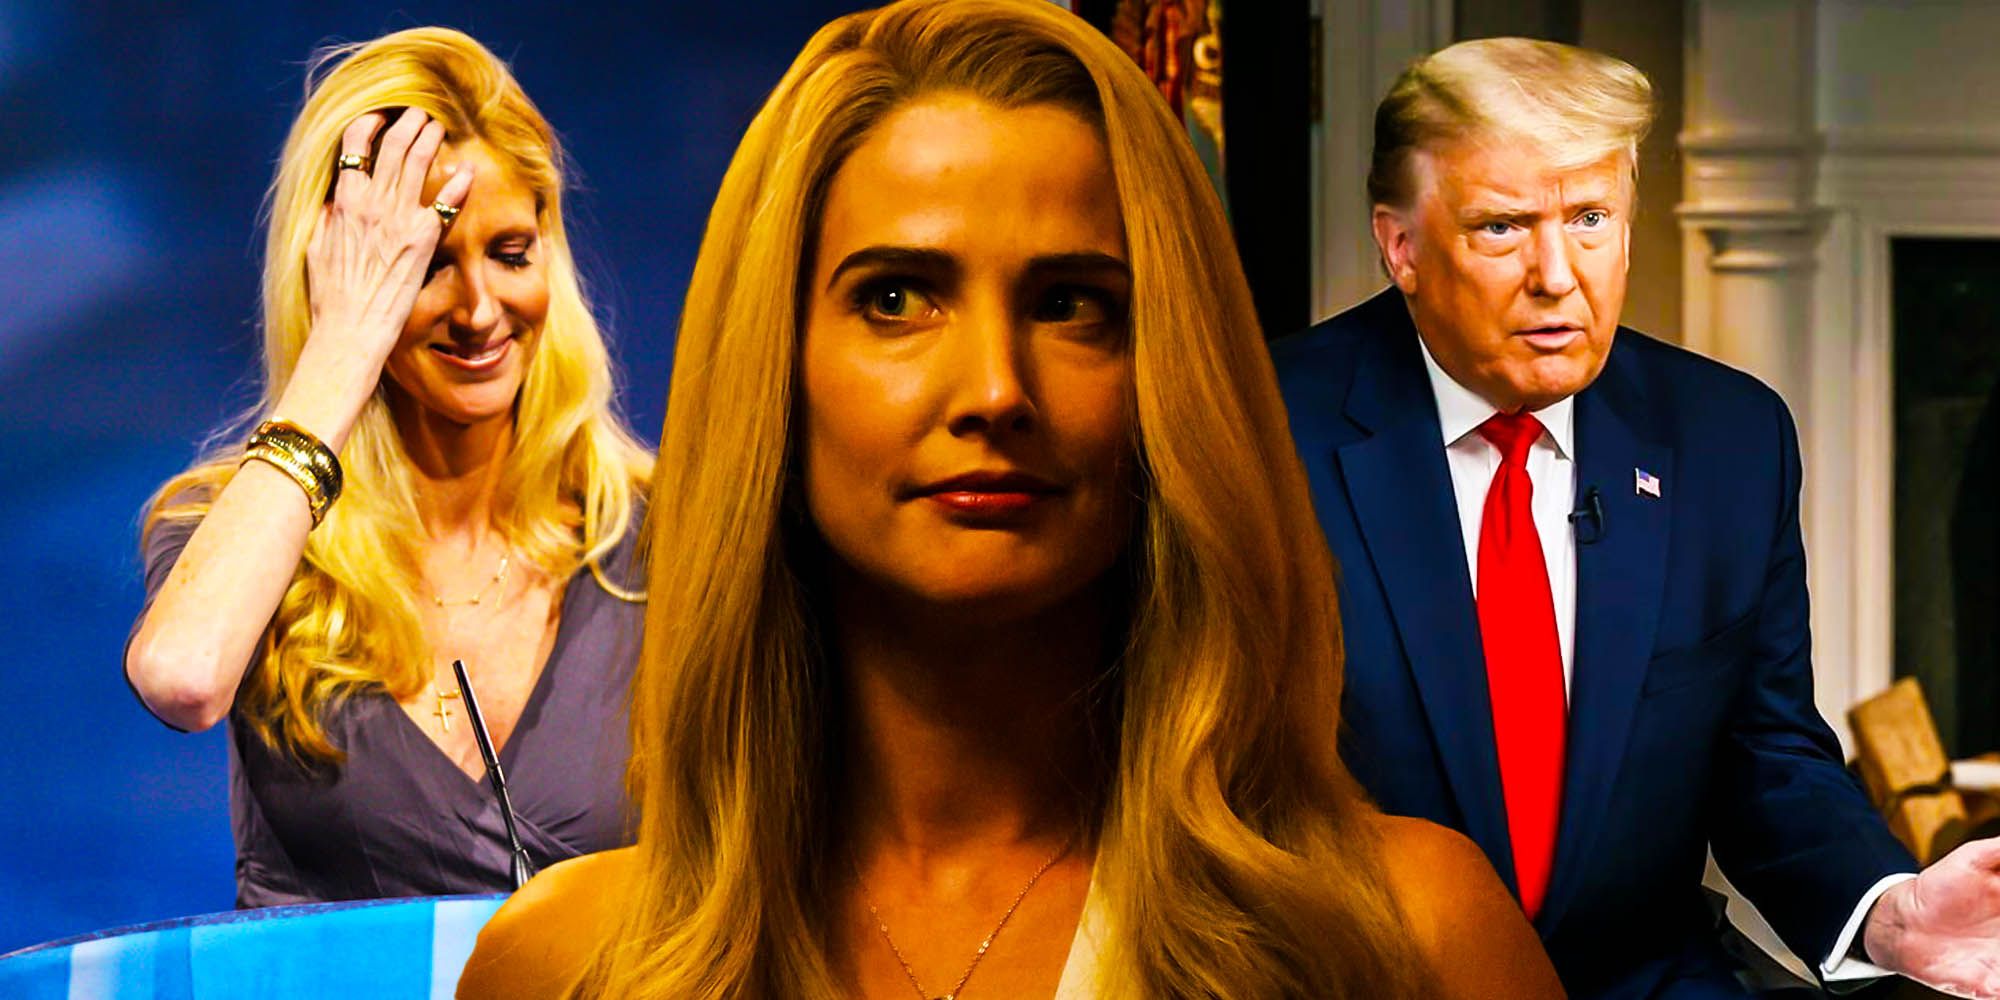 American Crime story impeachment Ann Coulter comments contradict Trump support